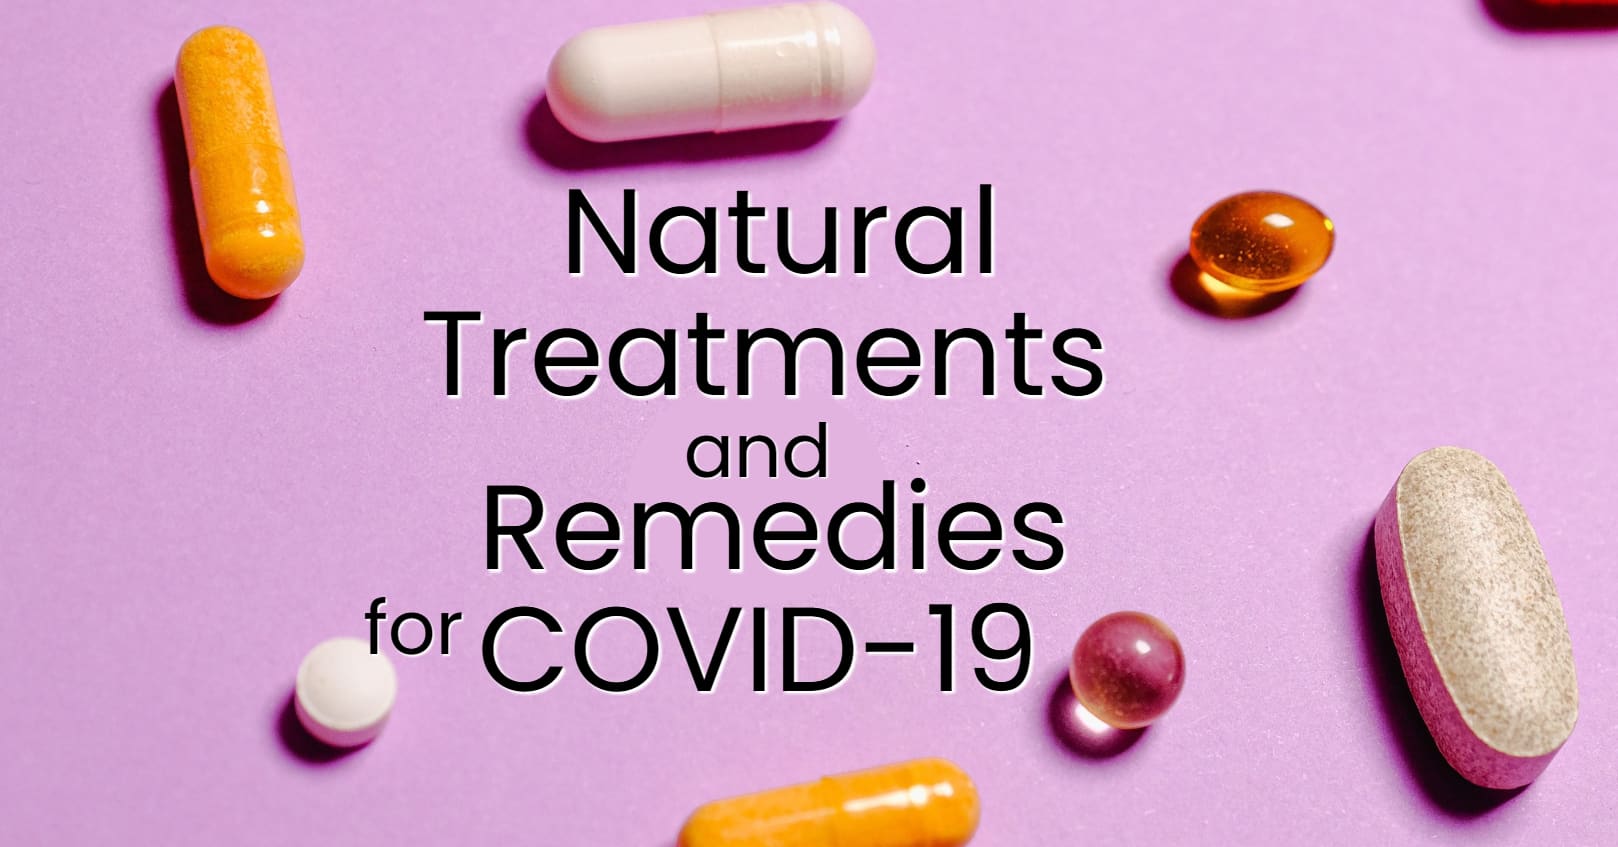 Natural treatments and remedies for COVID-19